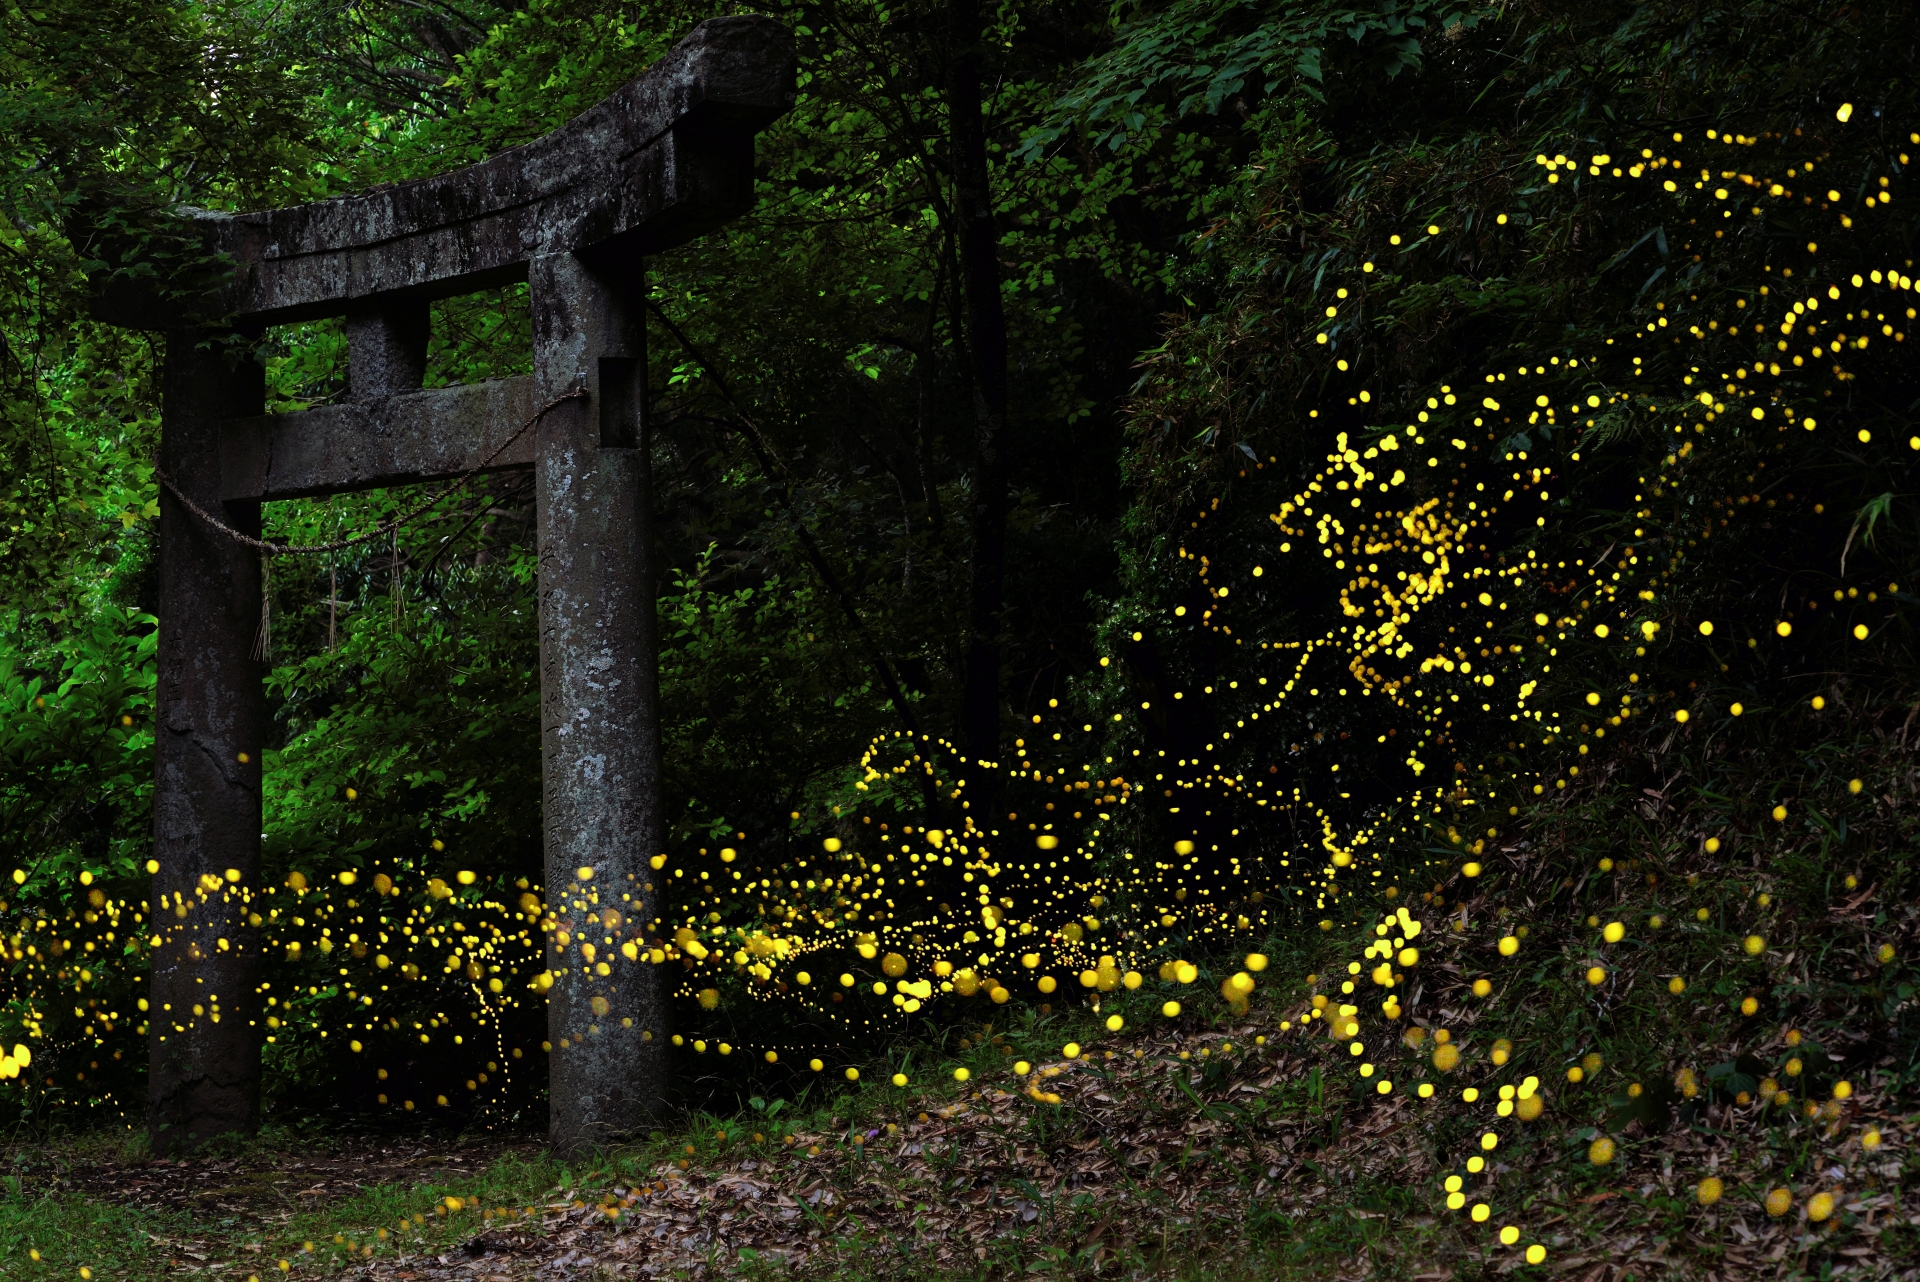 A shrine gate in the forest at night with many fireflies